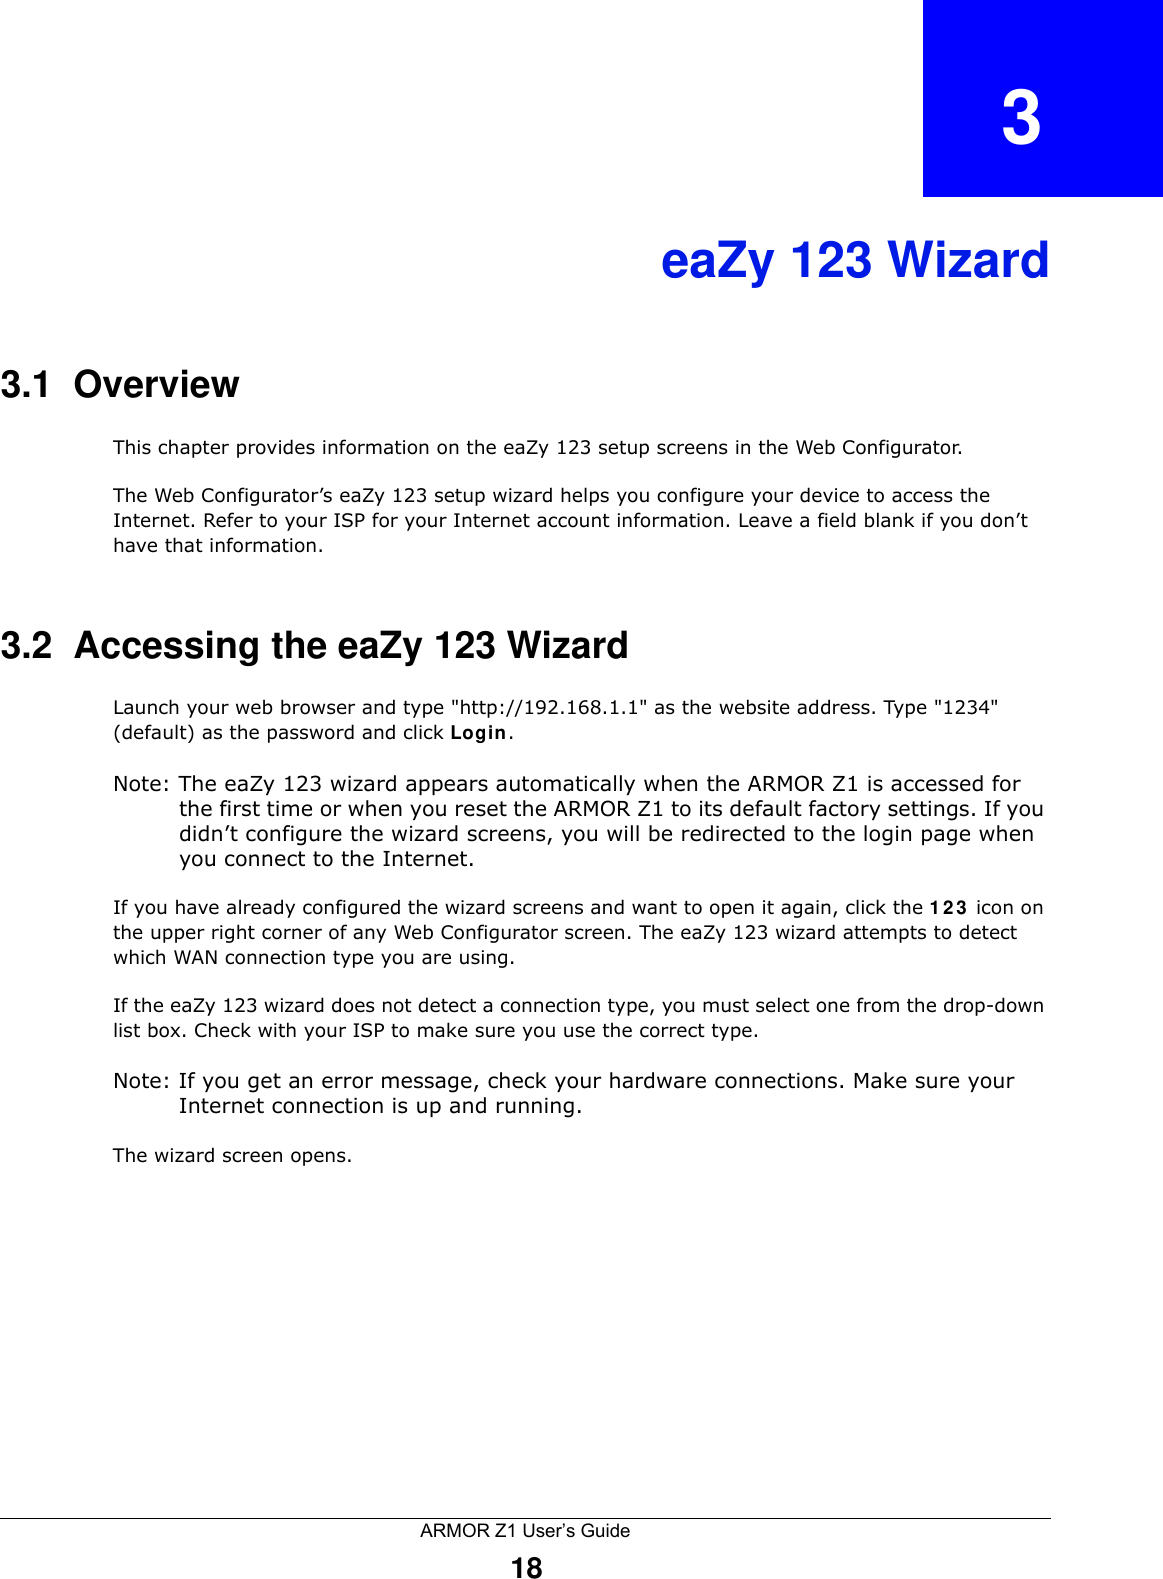 ARMOR Z1 User’s Guide18CHAPTER   3eaZy 123 Wizard3.1  OverviewThis chapter provides information on the eaZy 123 setup screens in the Web Configurator.The Web Configurator’s eaZy 123 setup wizard helps you configure your device to access the Internet. Refer to your ISP for your Internet account information. Leave a field blank if you don’t have that information.3.2  Accessing the eaZy 123 WizardLaunch your web browser and type &quot;http://192.168.1.1&quot; as the website address. Type &quot;1234&quot; (default) as the password and click Login.Note: The eaZy 123 wizard appears automatically when the ARMOR Z1 is accessed for the first time or when you reset the ARMOR Z1 to its default factory settings. If you didn’t configure the wizard screens, you will be redirected to the login page when you connect to the Internet.If you have already configured the wizard screens and want to open it again, click the 123 icon on the upper right corner of any Web Configurator screen. The eaZy 123 wizard attempts to detect which WAN connection type you are using. If the eaZy 123 wizard does not detect a connection type, you must select one from the drop-down list box. Check with your ISP to make sure you use the correct type.Note: If you get an error message, check your hardware connections. Make sure your Internet connection is up and running.The wizard screen opens. 